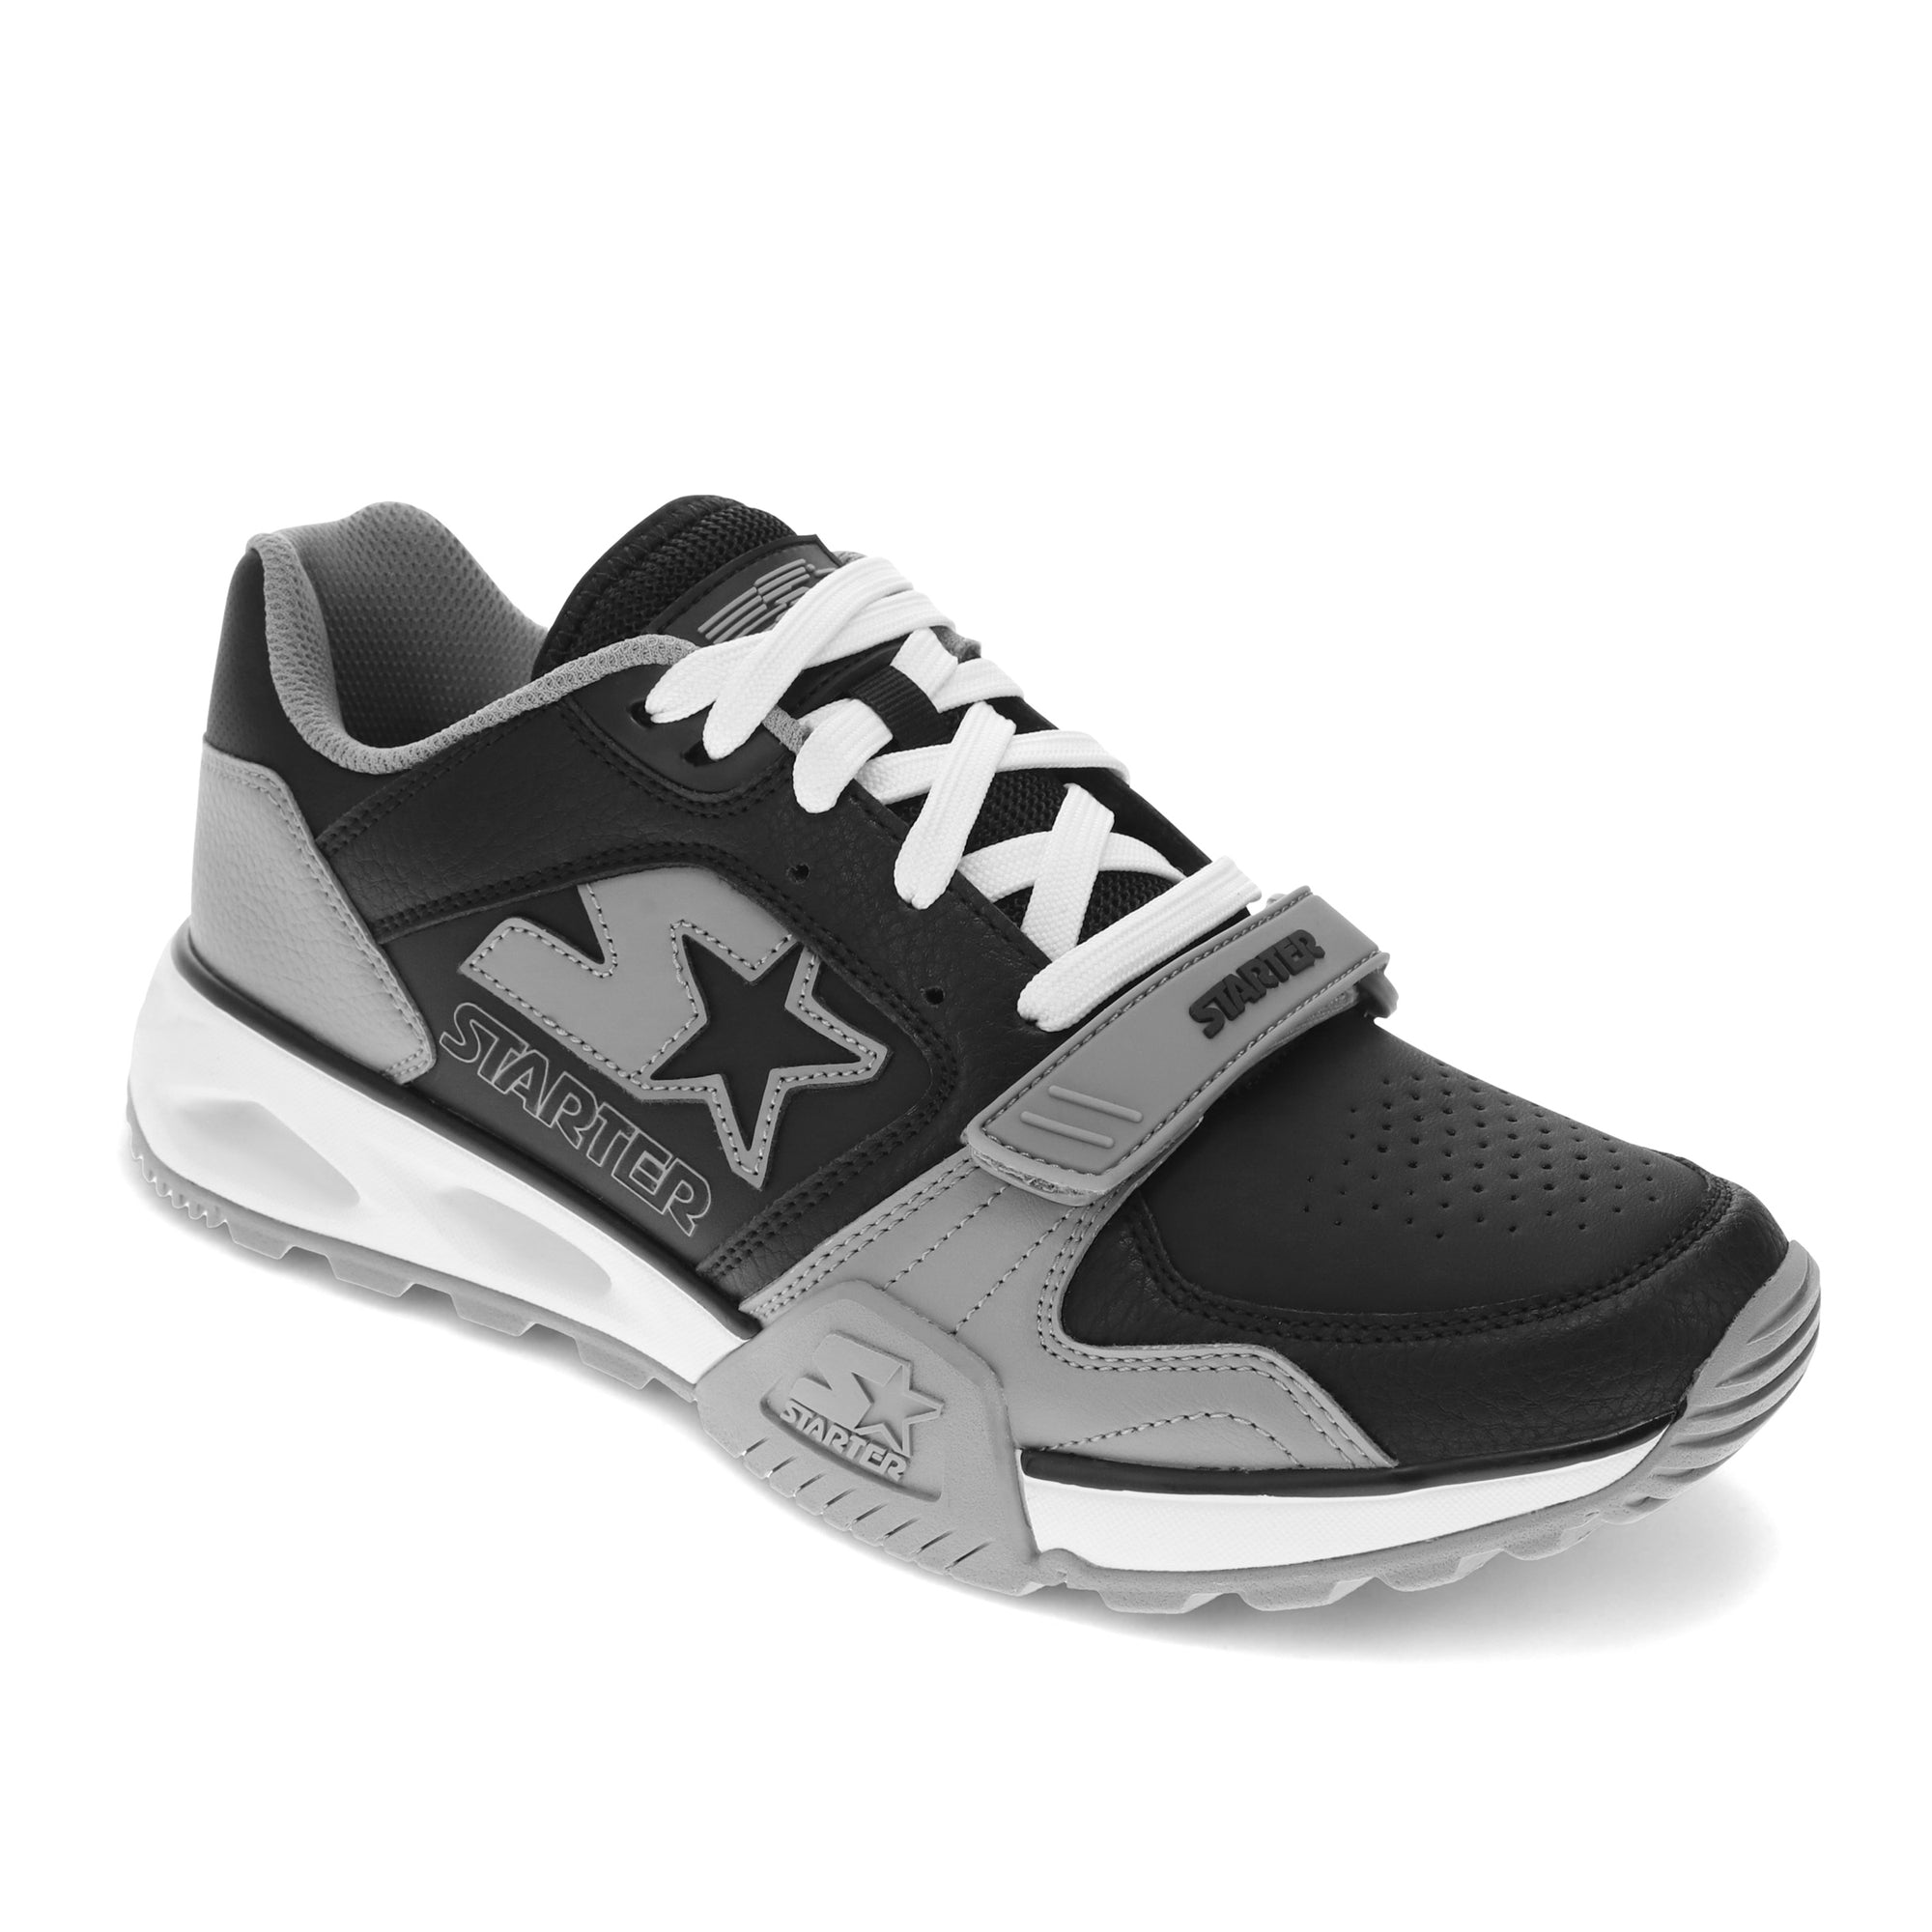 Black/Gray-Starter Mens Team Trainer 92 Low Vegan Synthetic Leather Casual Lowtop Sneaker Shoe